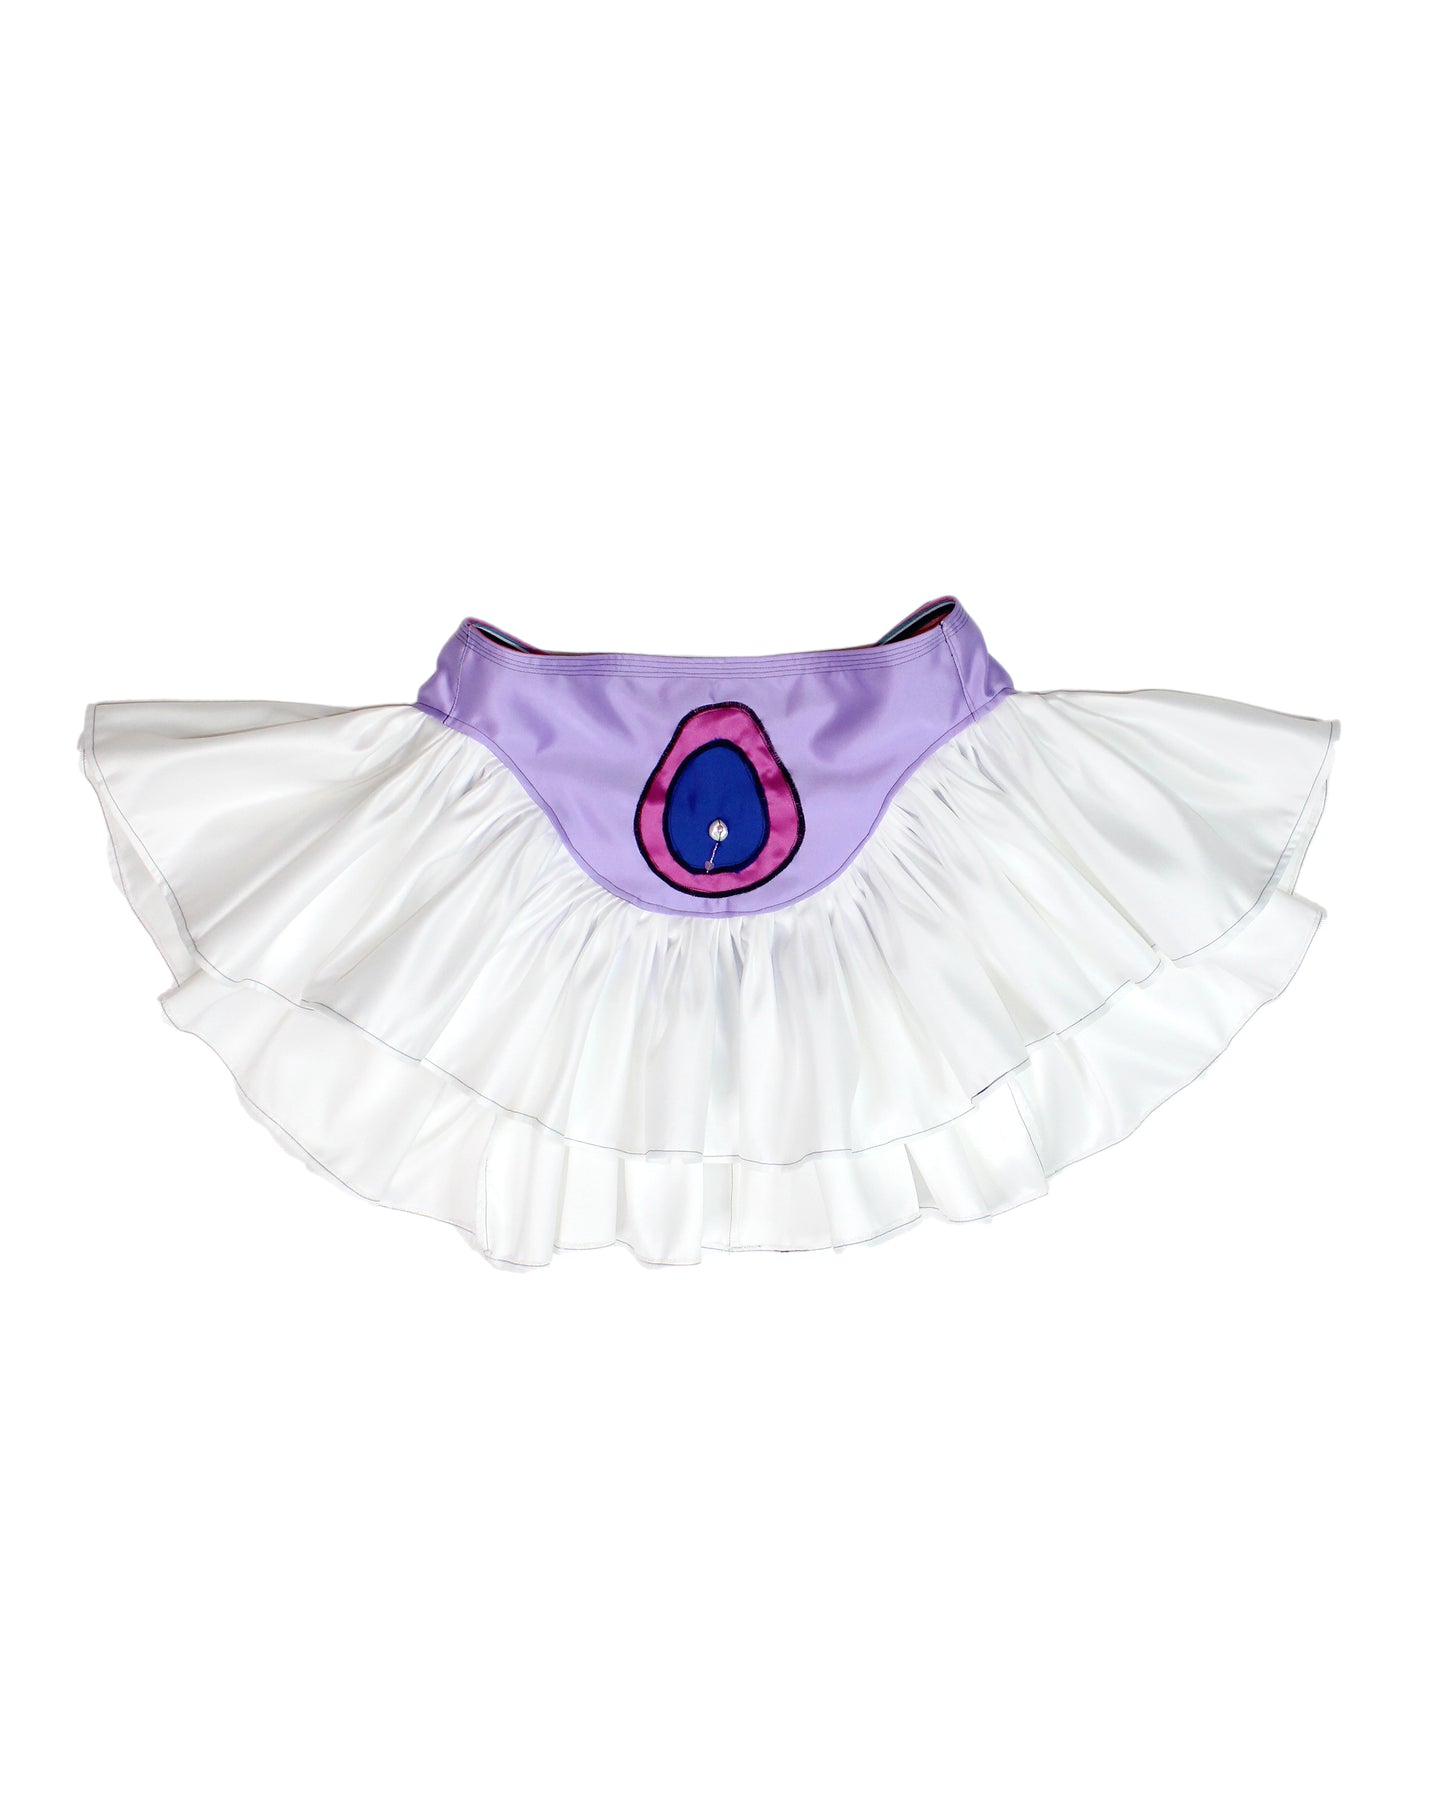 005 Accidental Sailor Belly Button Ring Miniskirt